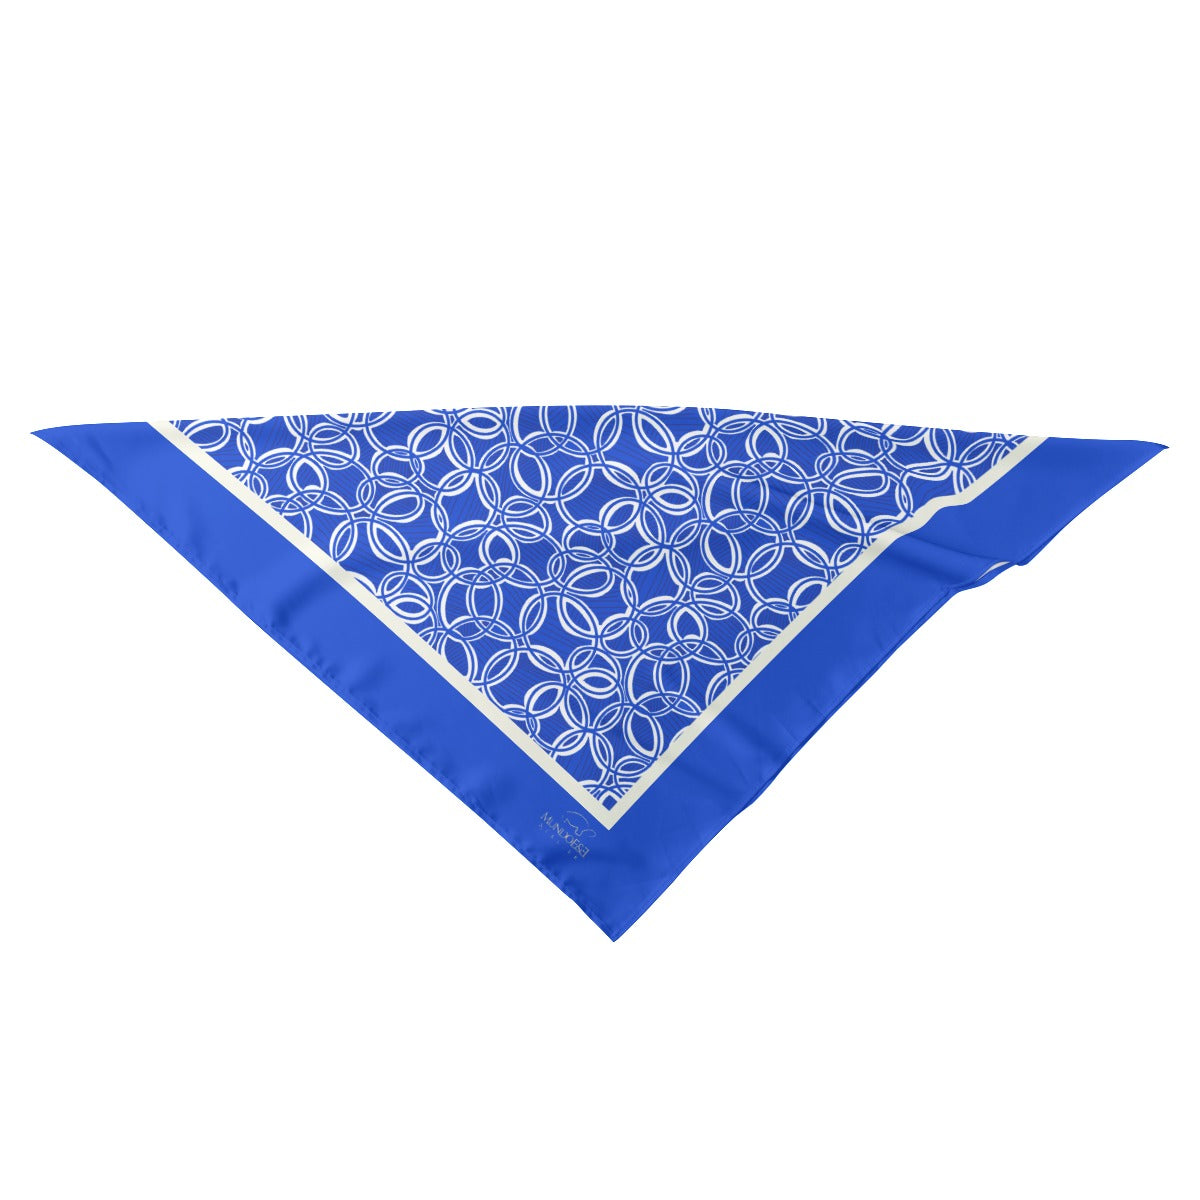 Geometric Blue and White Silk Scarf. Design hand-painted by the Designer Maria Alejandra Echenique